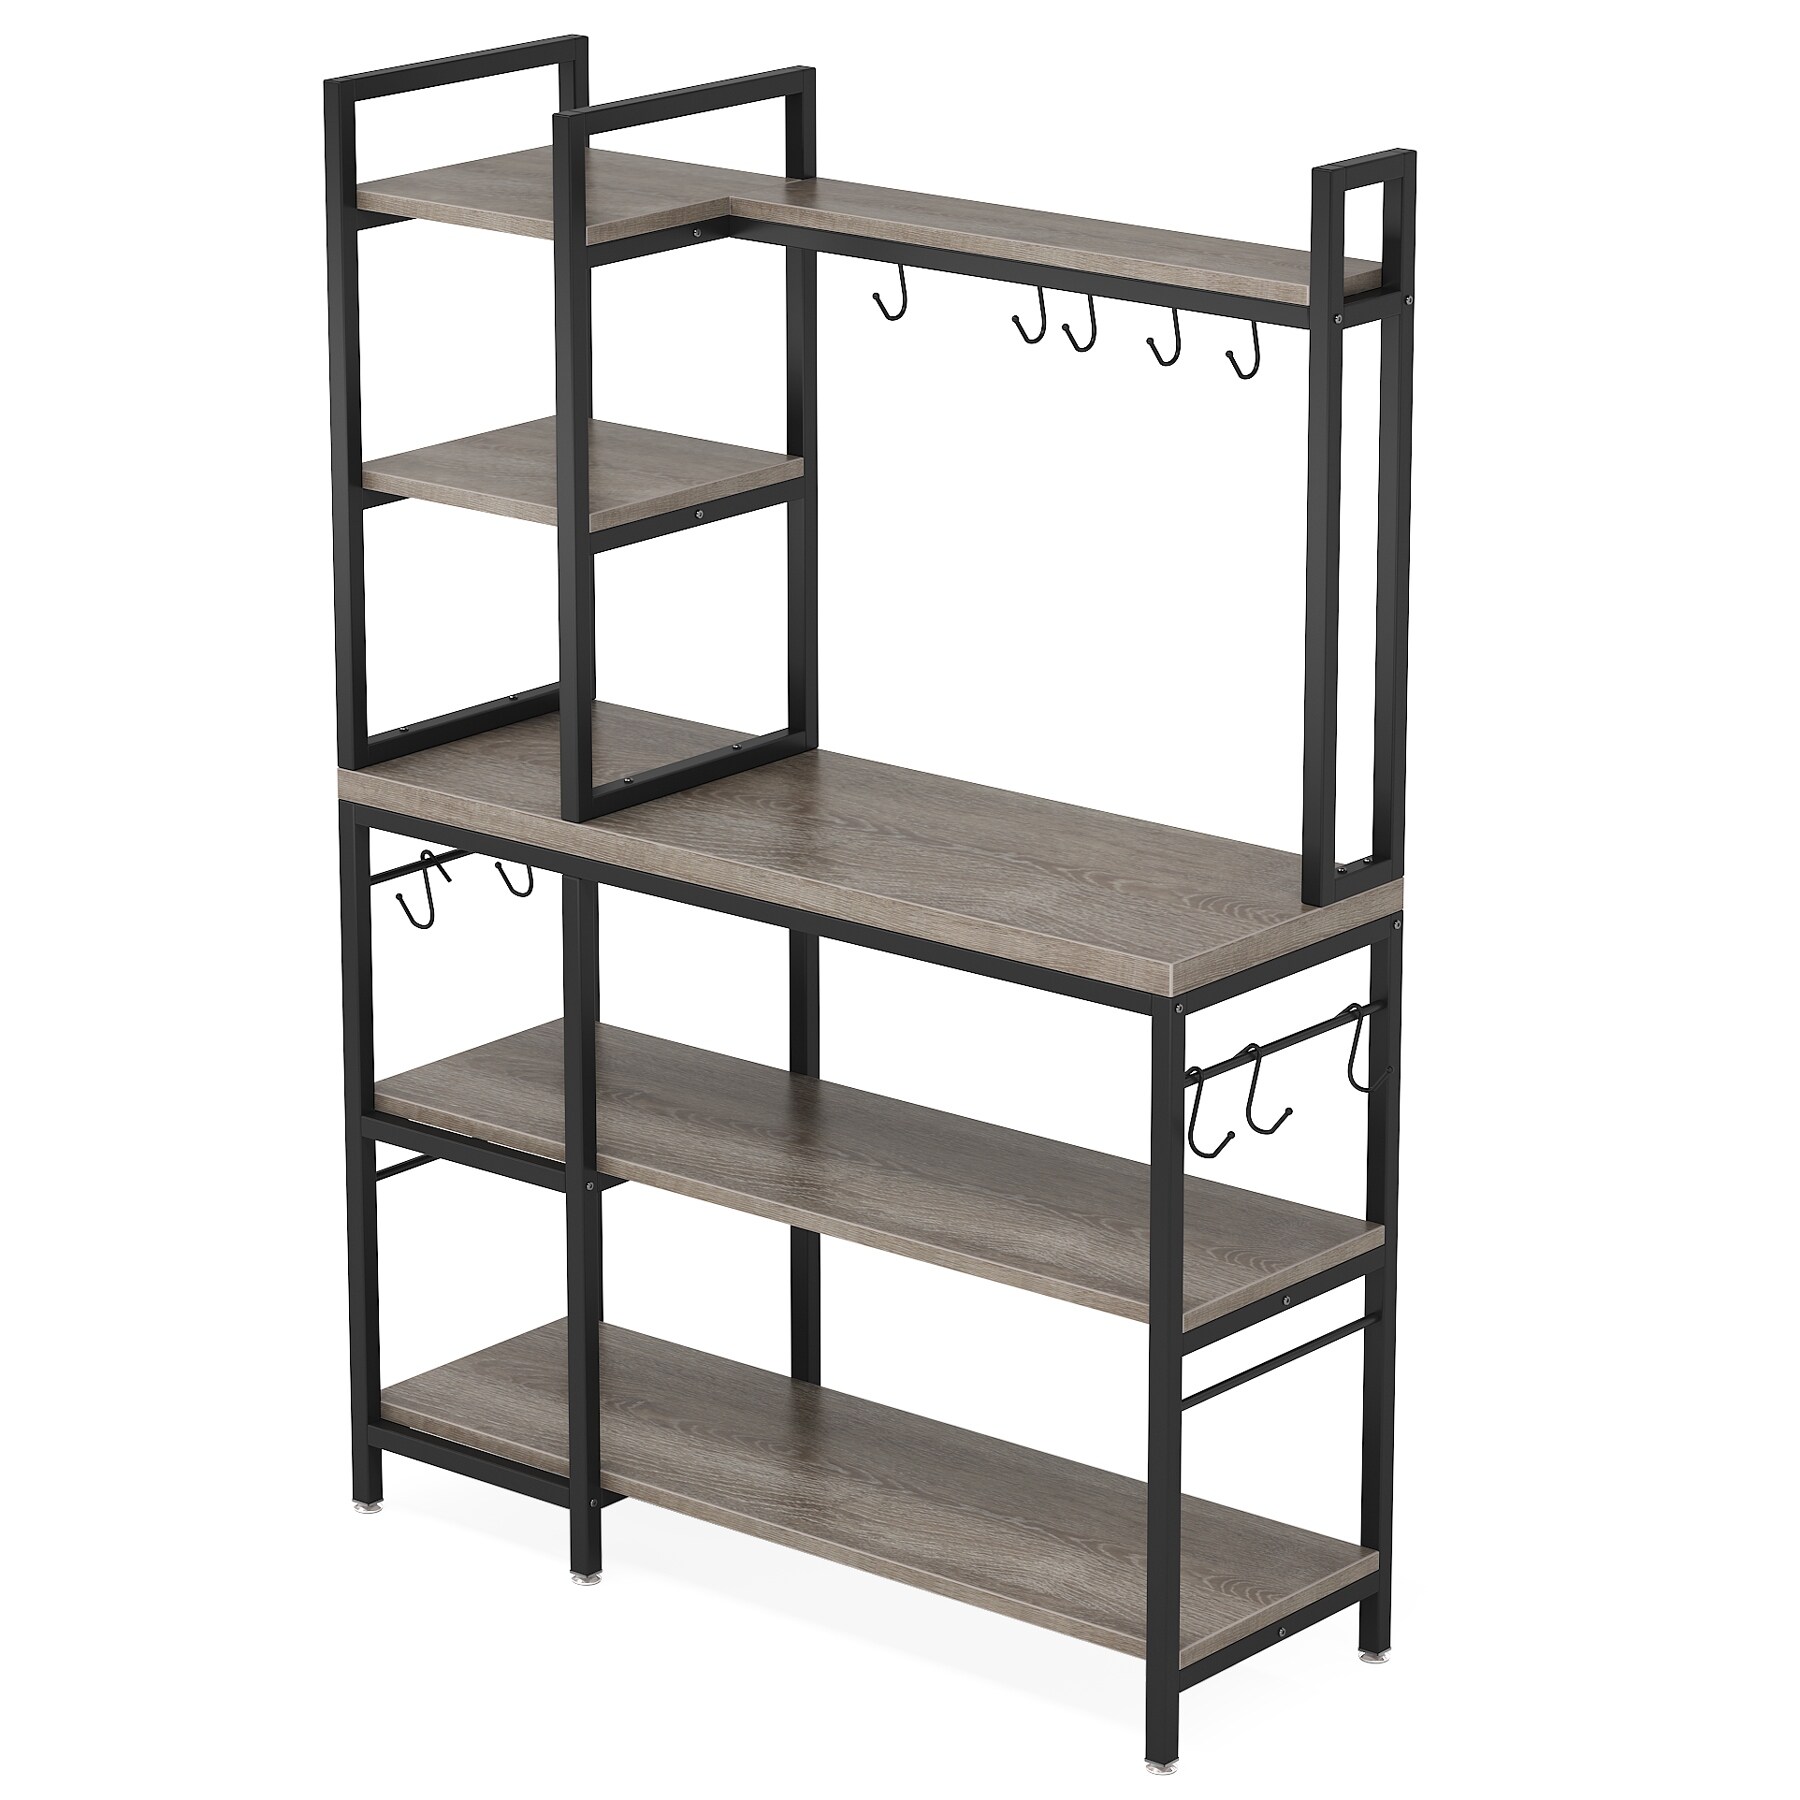 https://ak1.ostkcdn.com/images/products/is/images/direct/7af8b165841e863c8bd5792882dd5dd85d1cd536/Brown-Industrial-Wood-Bakers-Rack-with-Storage%2CBlack-Modern-Microwave-Oven-Stand%2C5-Tier-Kitchen-Utility-Storage-Shelf.jpg